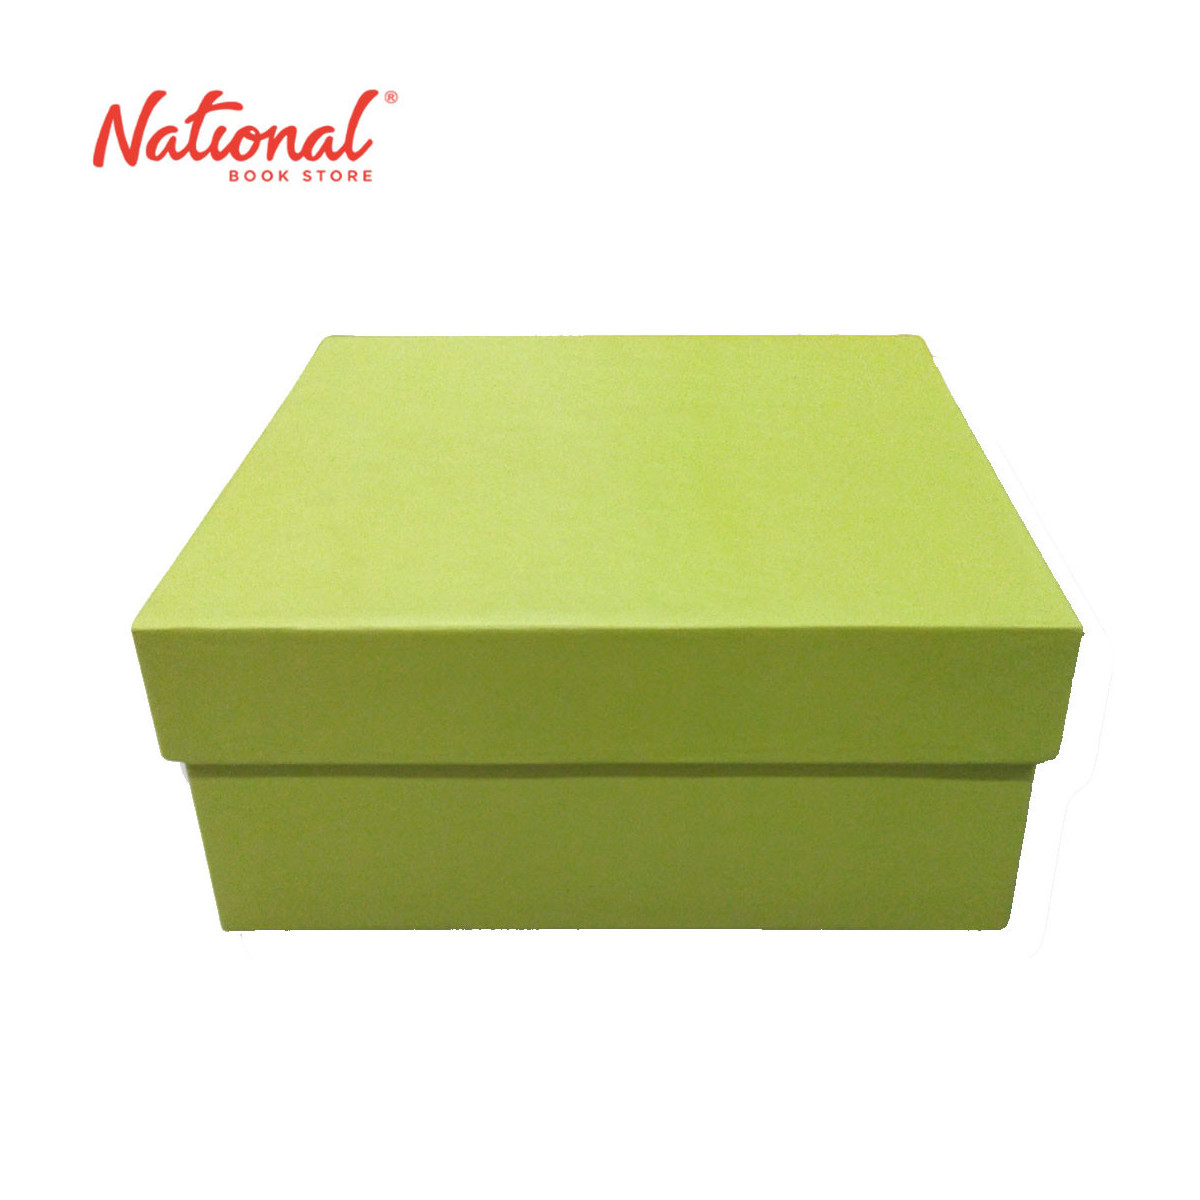 Plain Color Gift Box Square Small 15x15x8cm - Giftwrapping Supplies